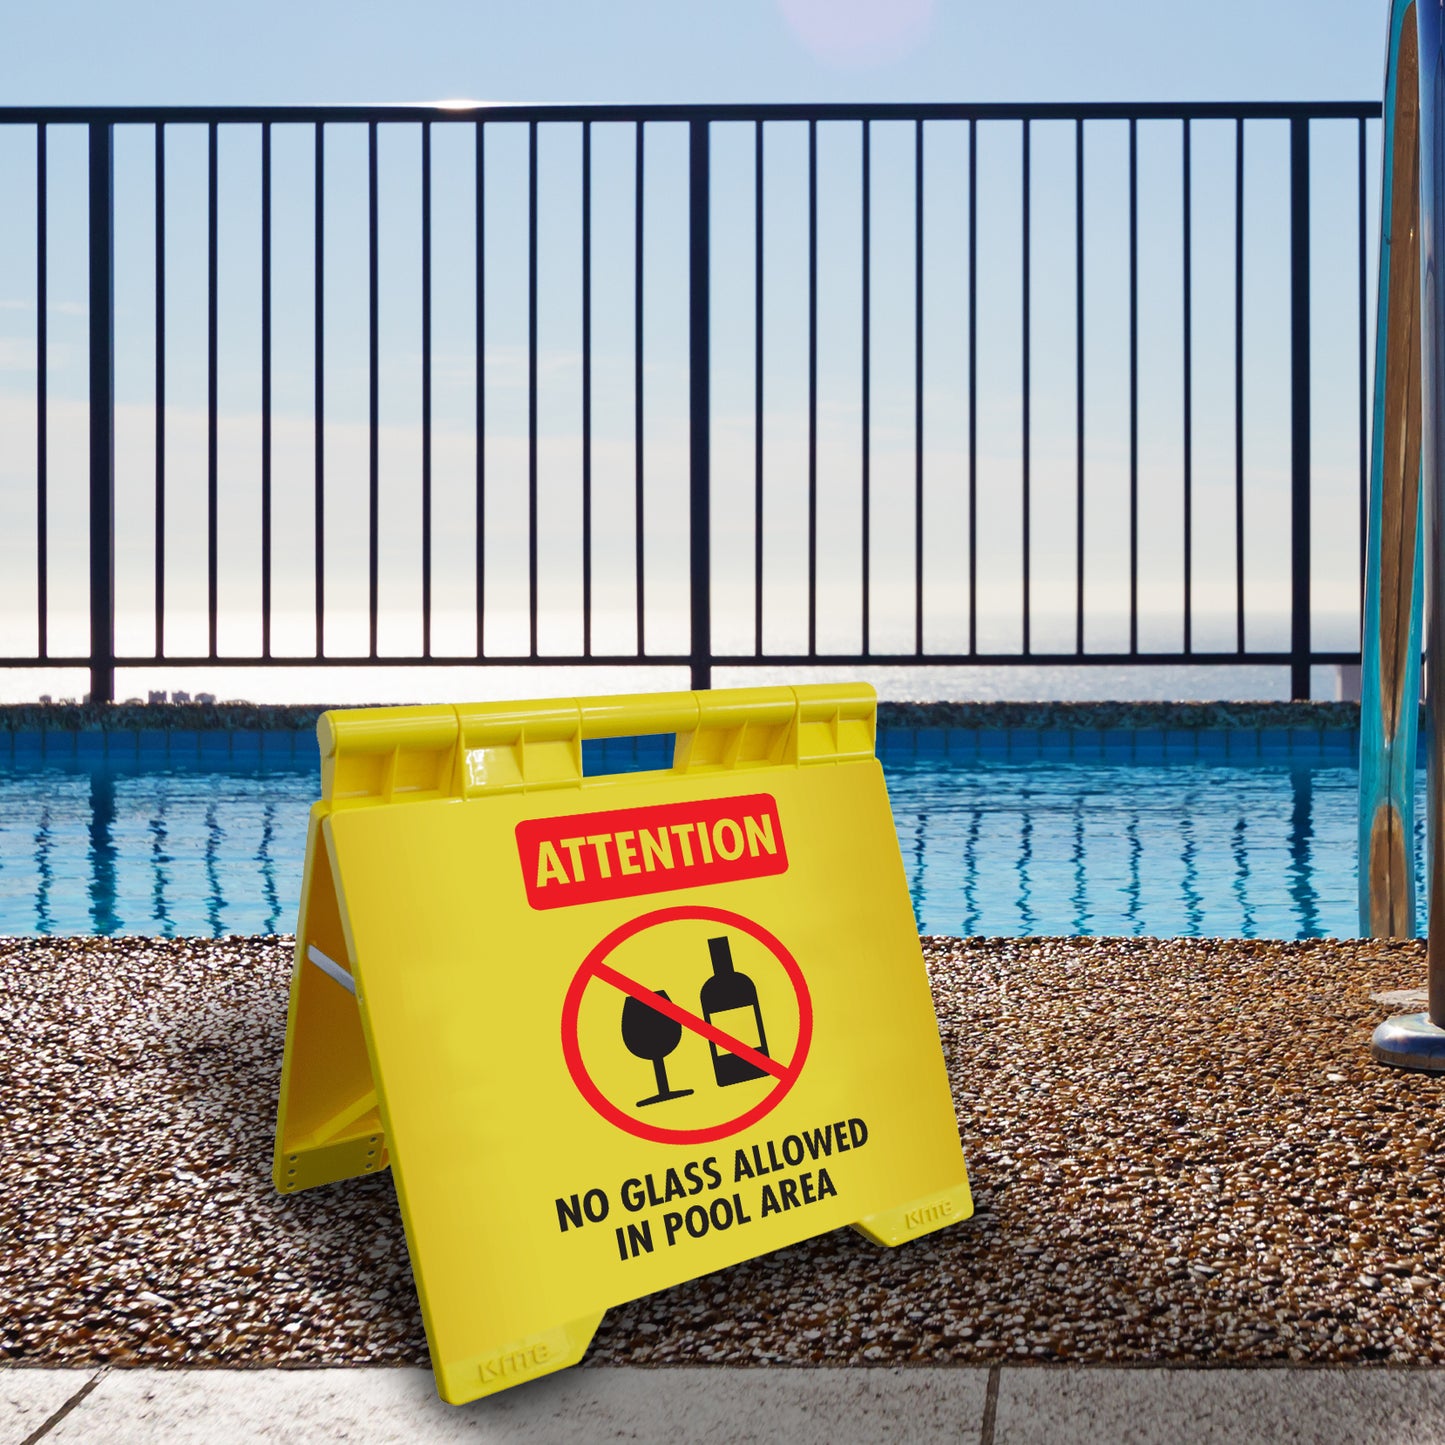 Attention No Glass Allowed In Pool Area - Evarite A-Frame Sign